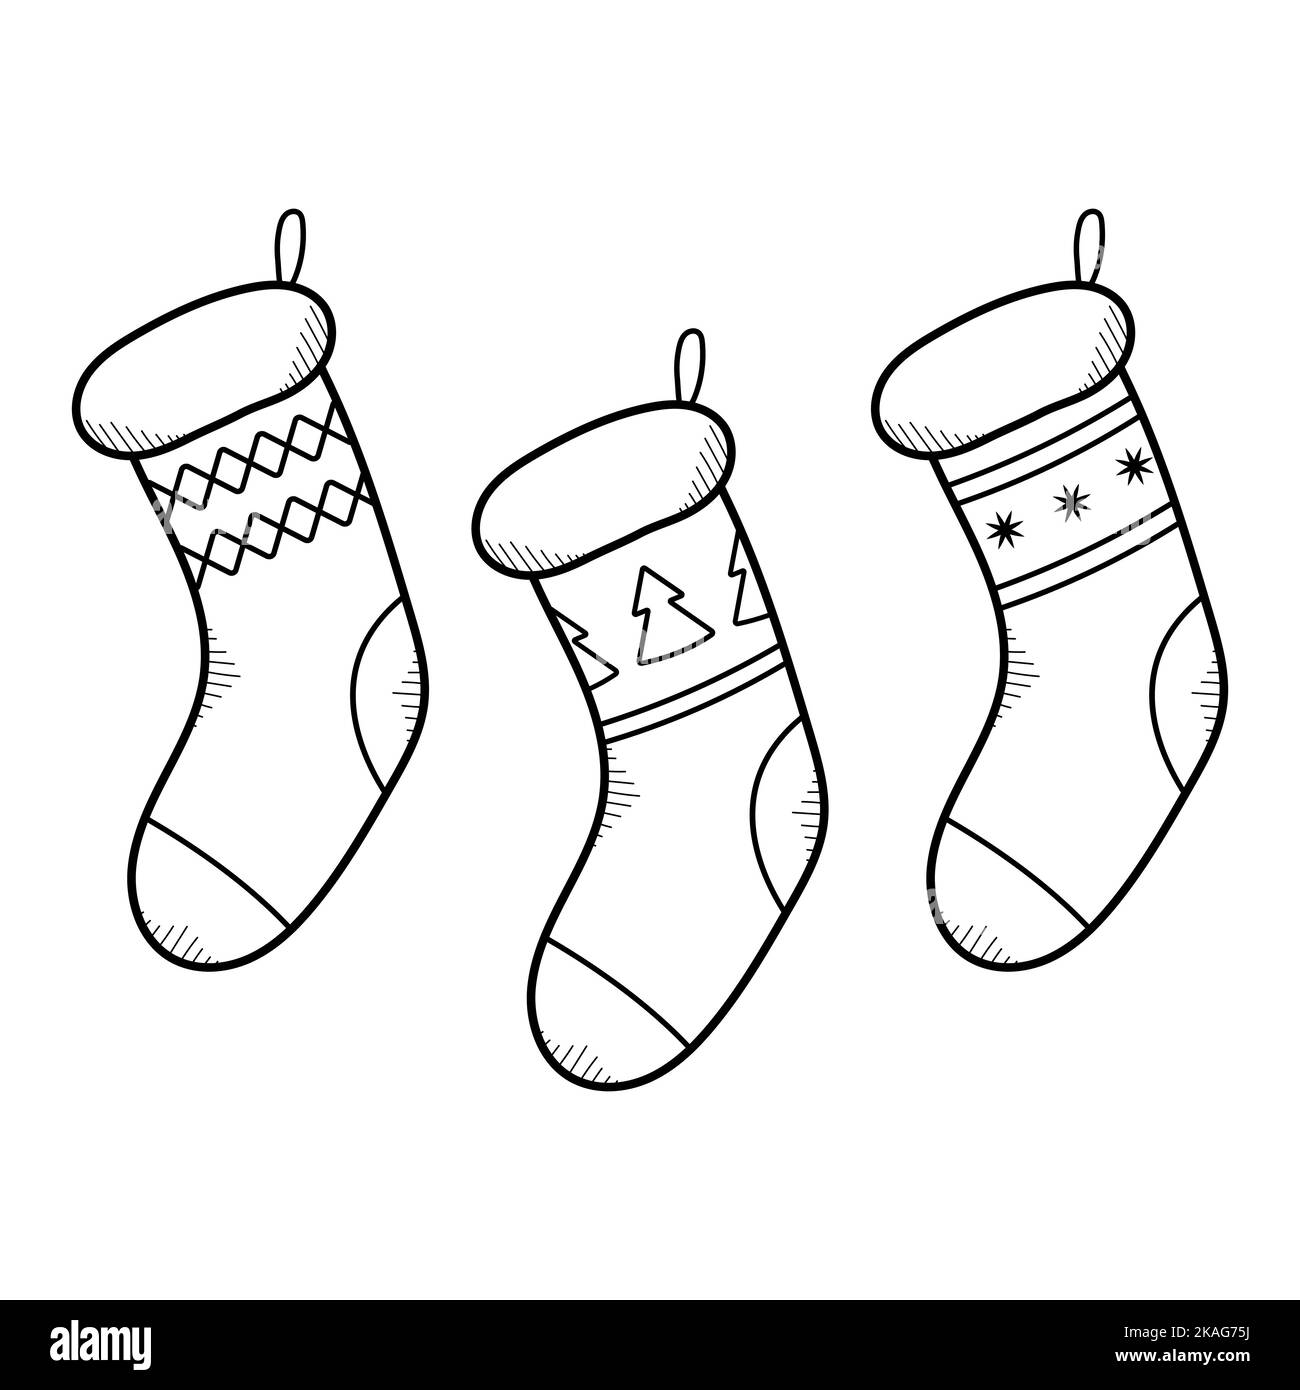 Set of hand-drawn Christmas socks. Stockings for gifts. Isolated vector illustrations in doodle sketch style. Stock Vector